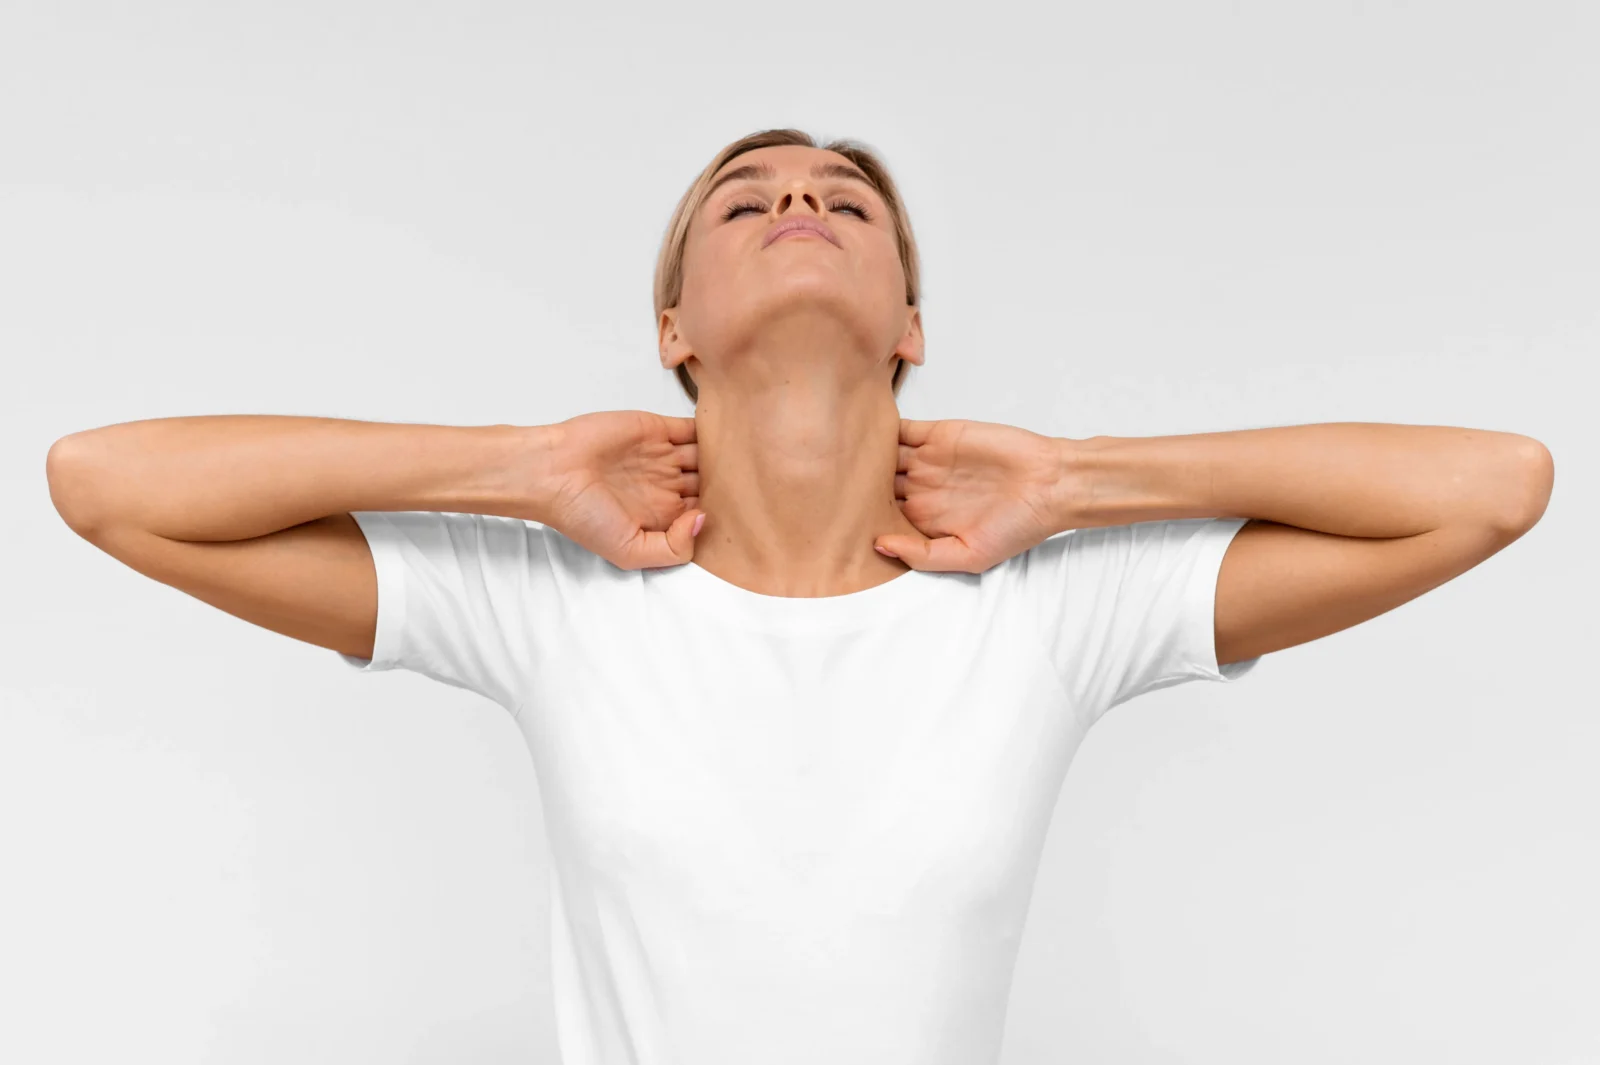 Sternocleidomastoid Syndrome: What You Need to Know